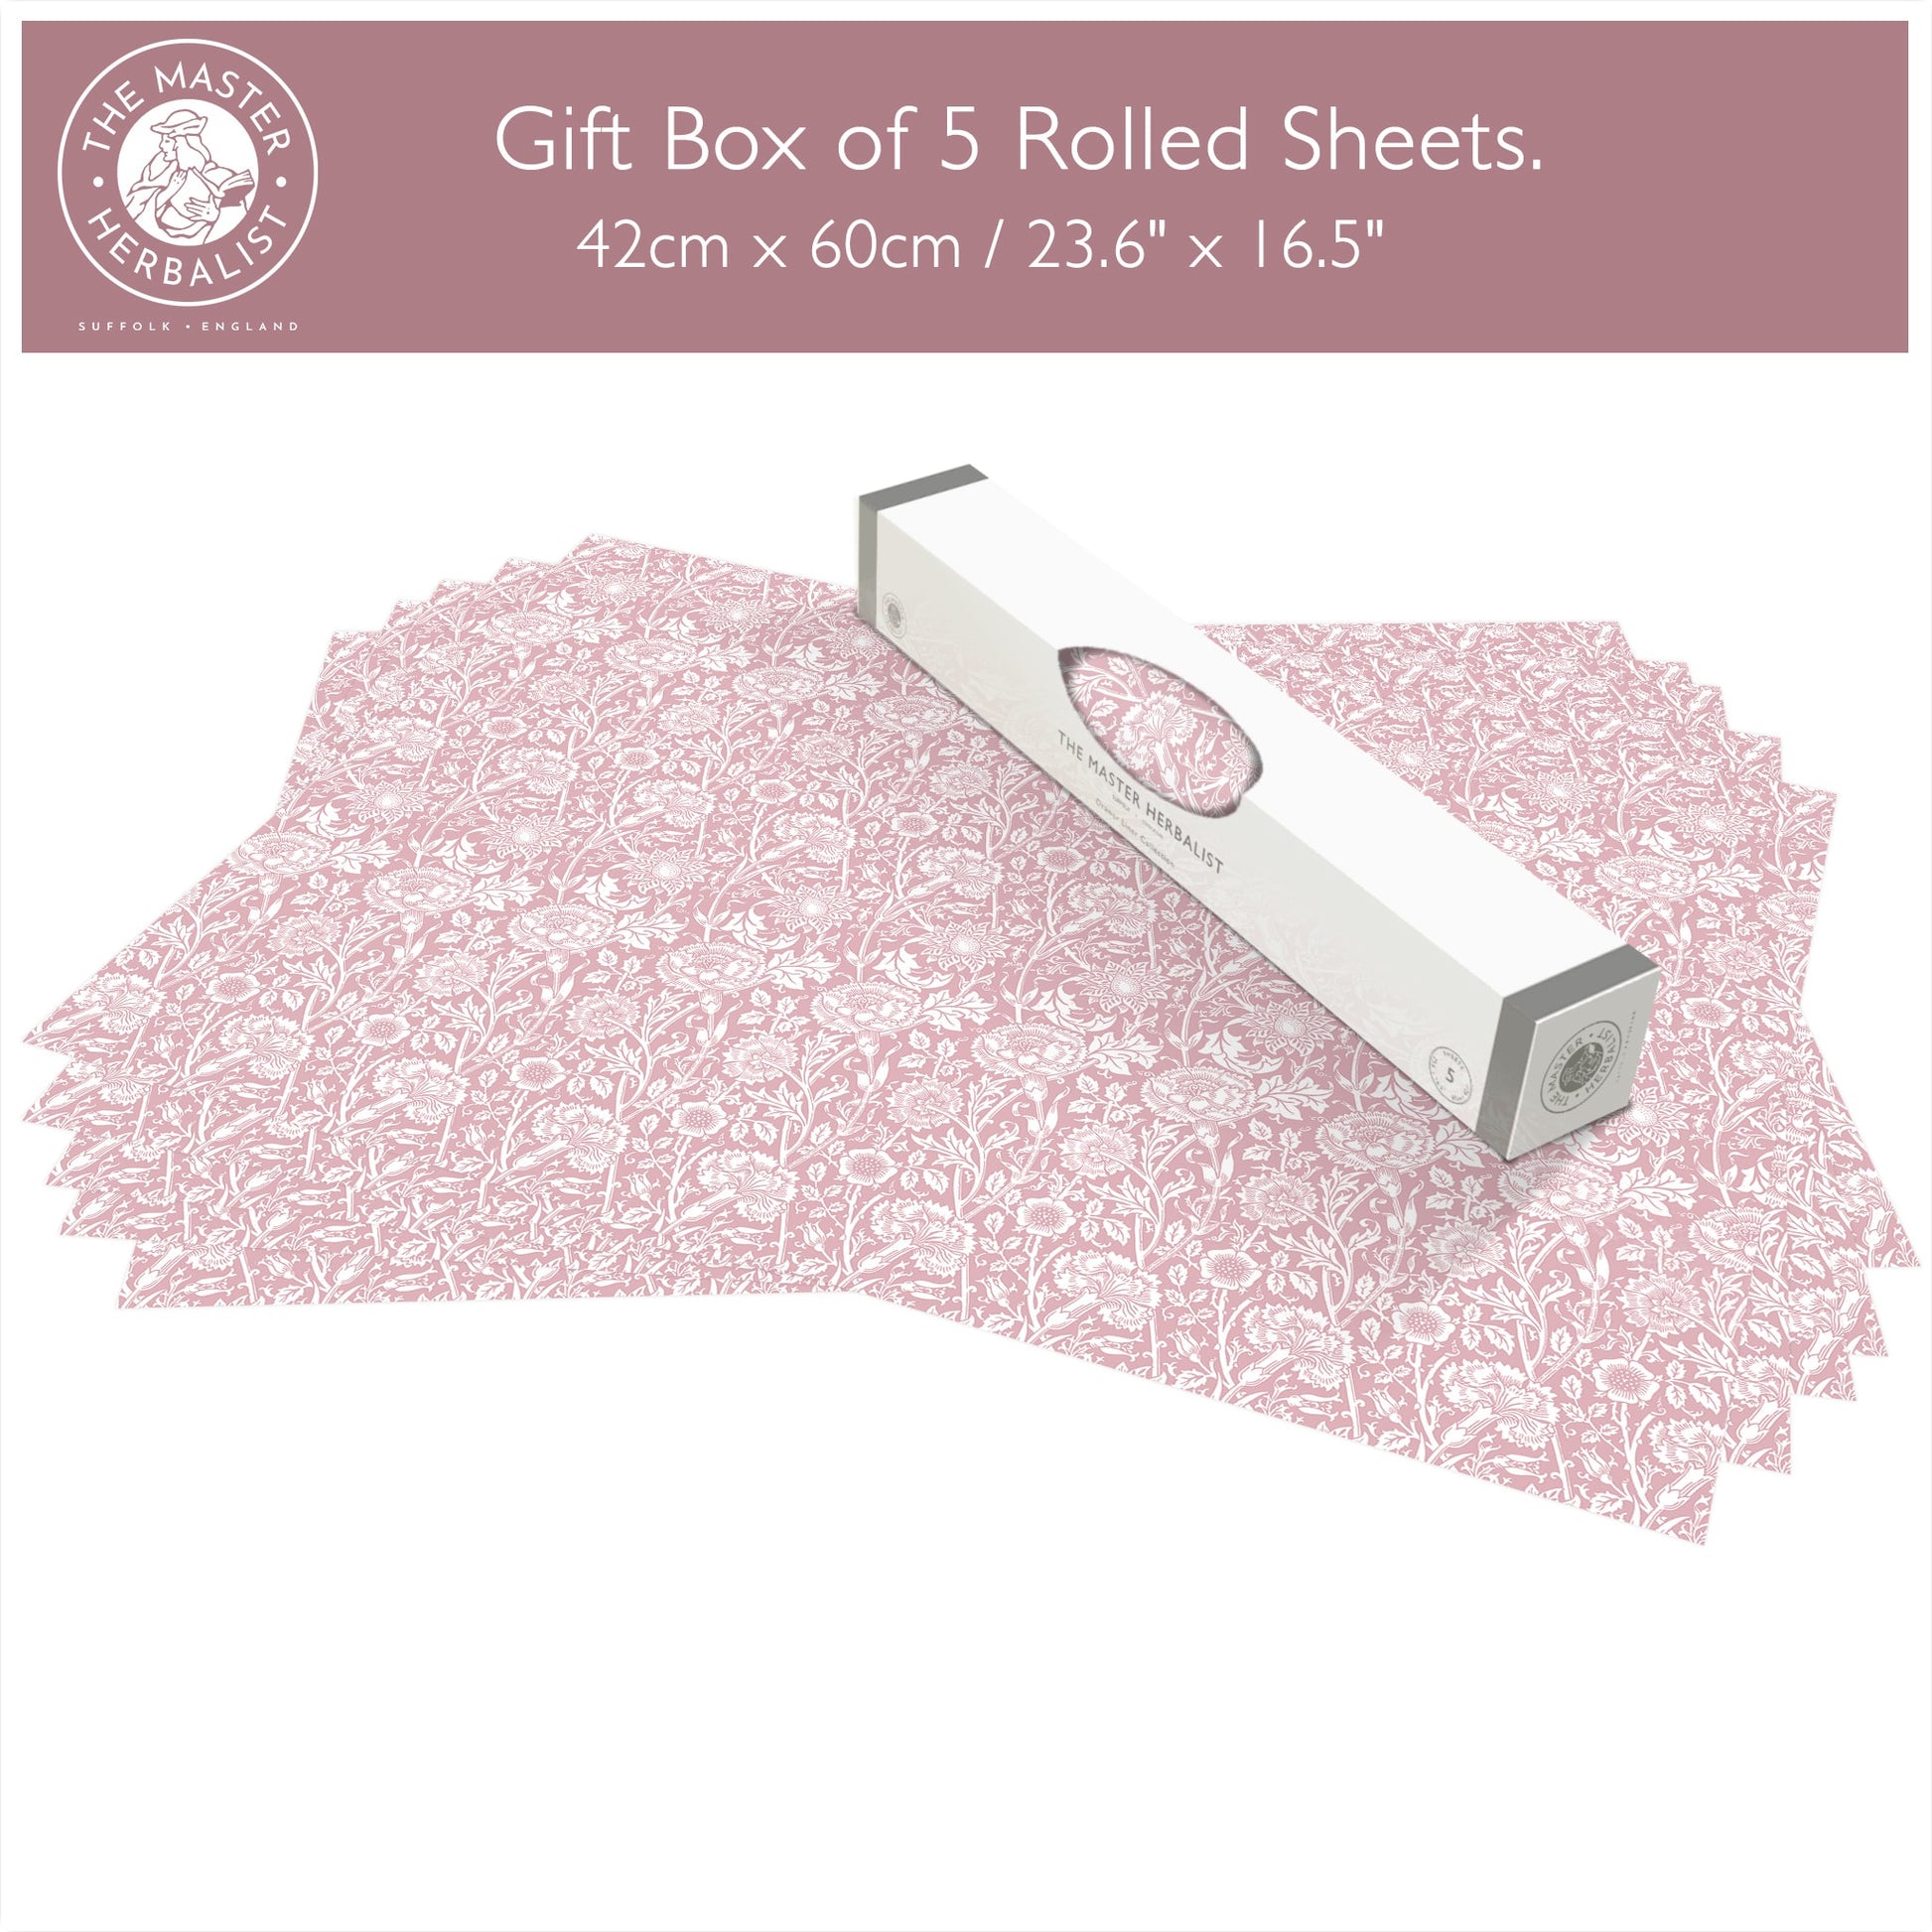 Simply Drawer Liners ROSE fragrance SCENTED Drawer Liners in PINK William Morris Design. Made in Britain.